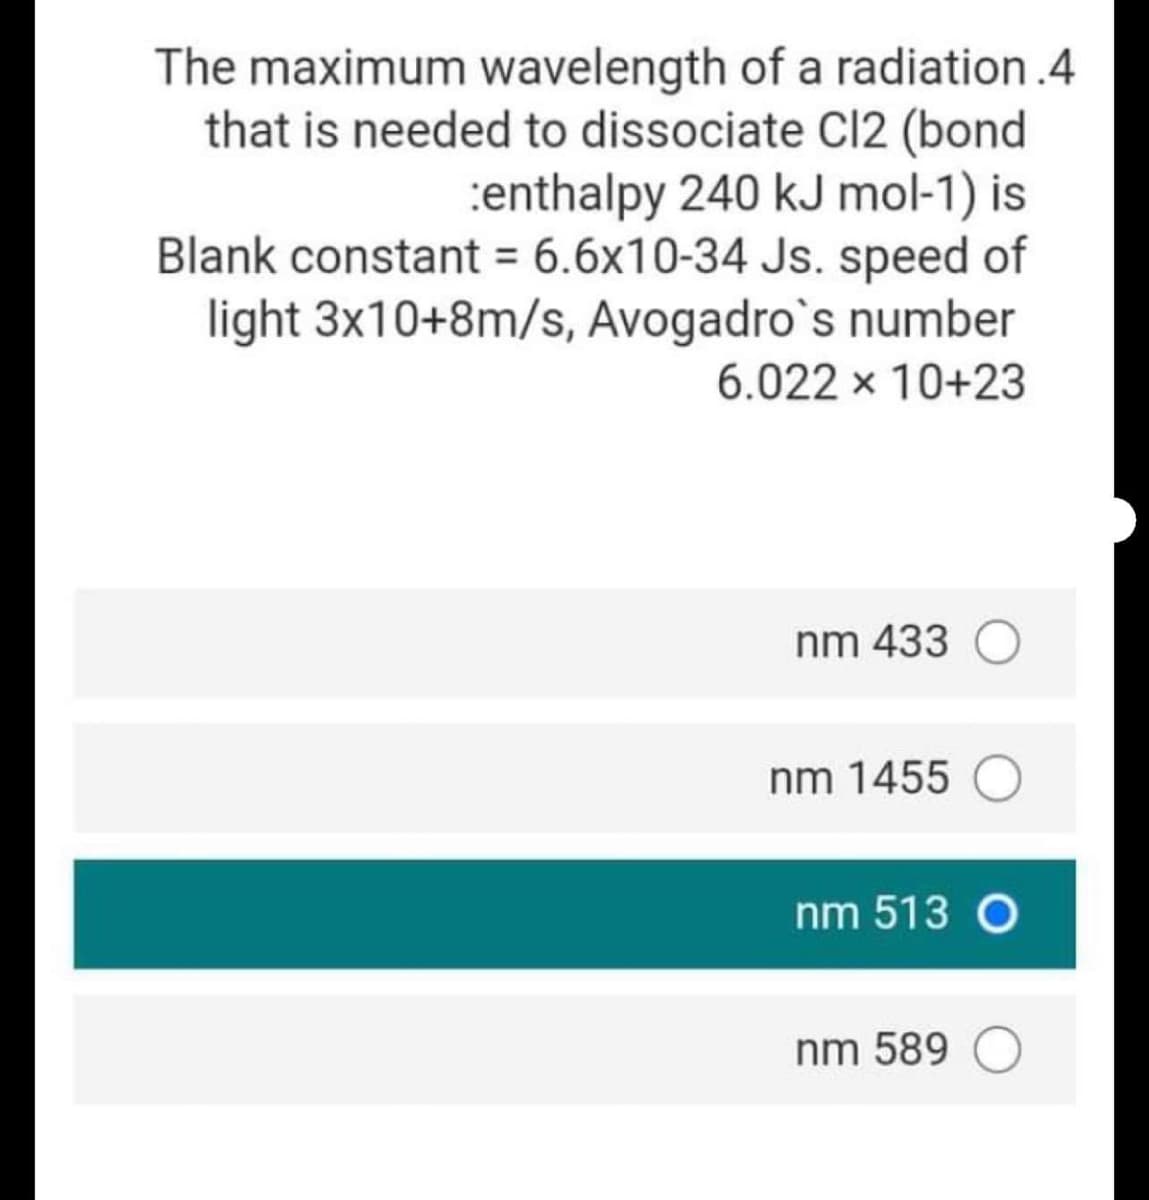 The maximum wavelength of a radiation.4
that is needed to dissociate Cl2 (bond
:enthalpy 240 kJ mol-1) is
Blank constant = 6.6x10-34 Js. speed of
light 3x10+8m/s, Avogadro`s number
6.022 x 10+23
nm 433
nm 1455
nm 513 O
nm 589
